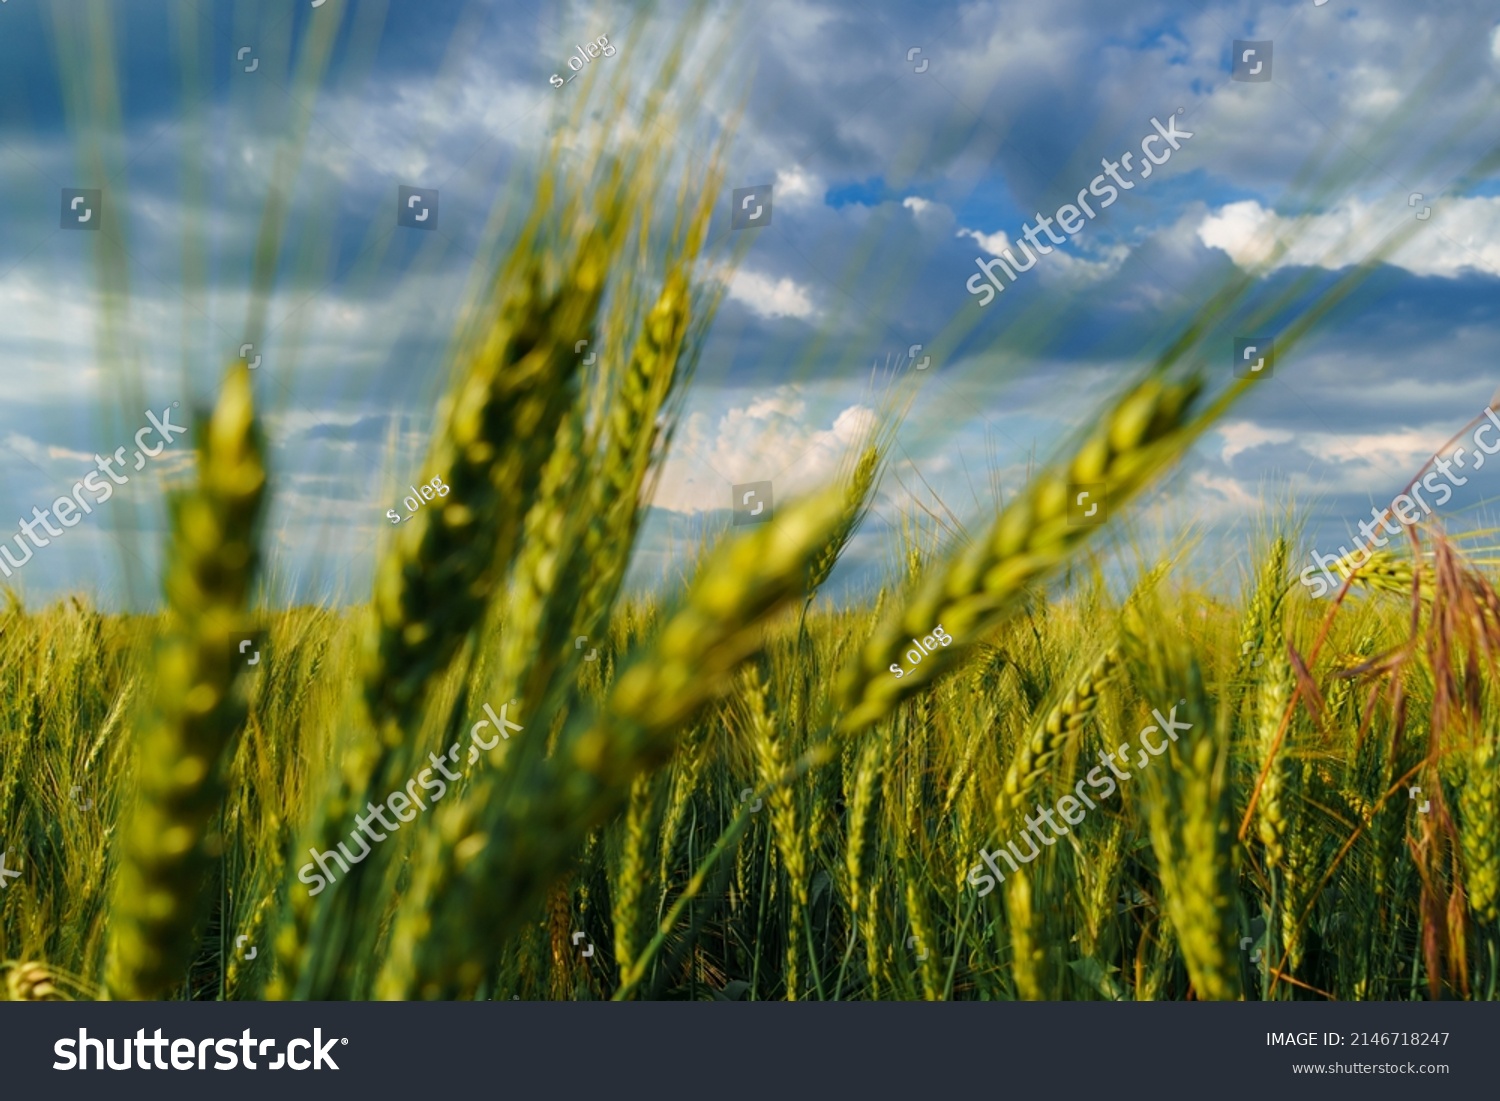 agricultural field with green wheat sprouts, dramatic spring landscape on cloudy day, overcast sky as background #2146718247